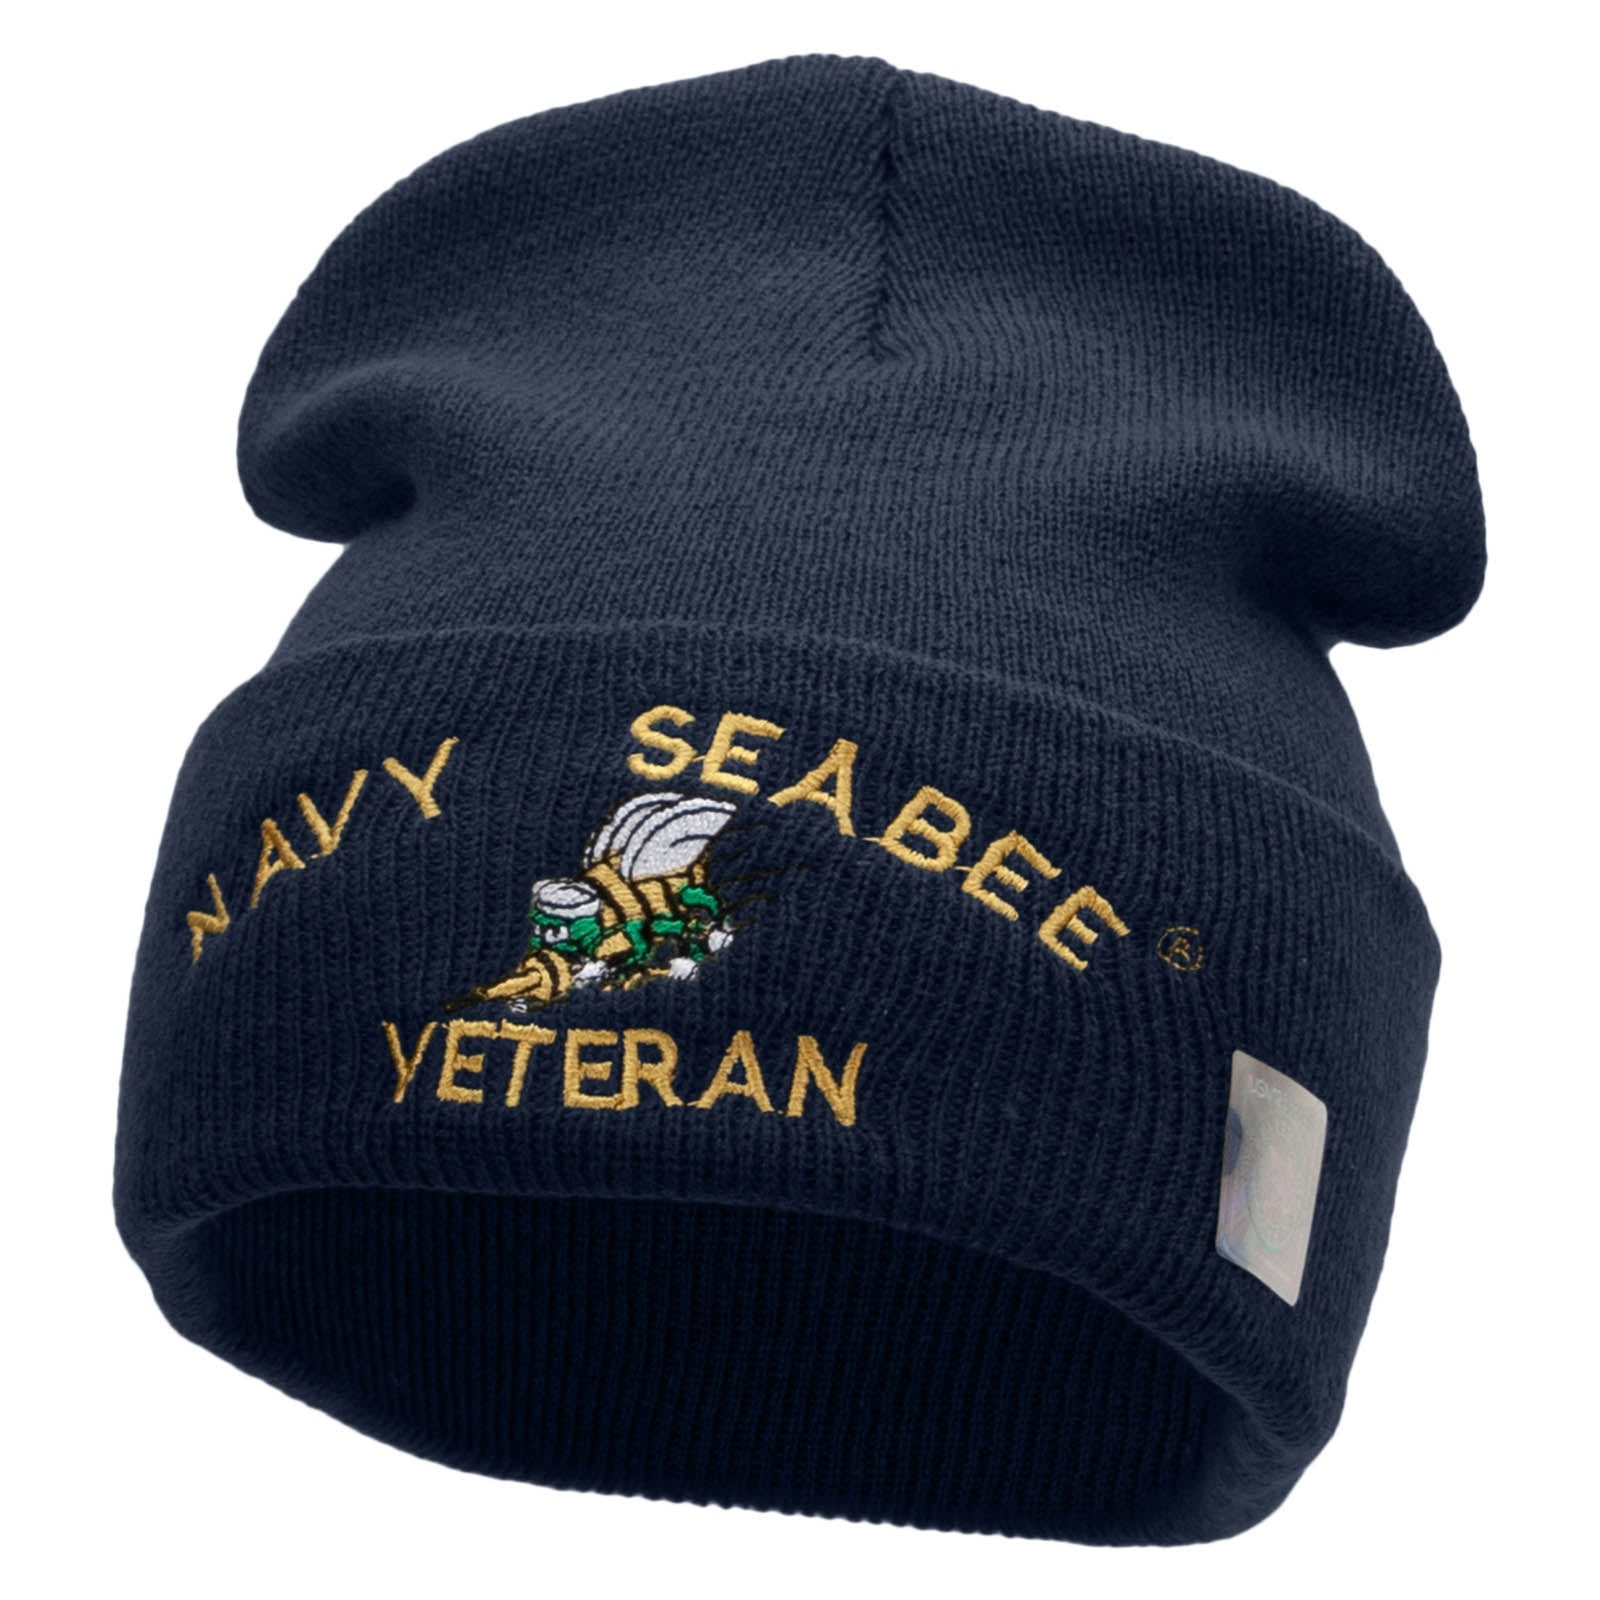 Licensed US Navy Seabee Veteran Military Embroidered Long Beanie Made in USA - Navy OSFM